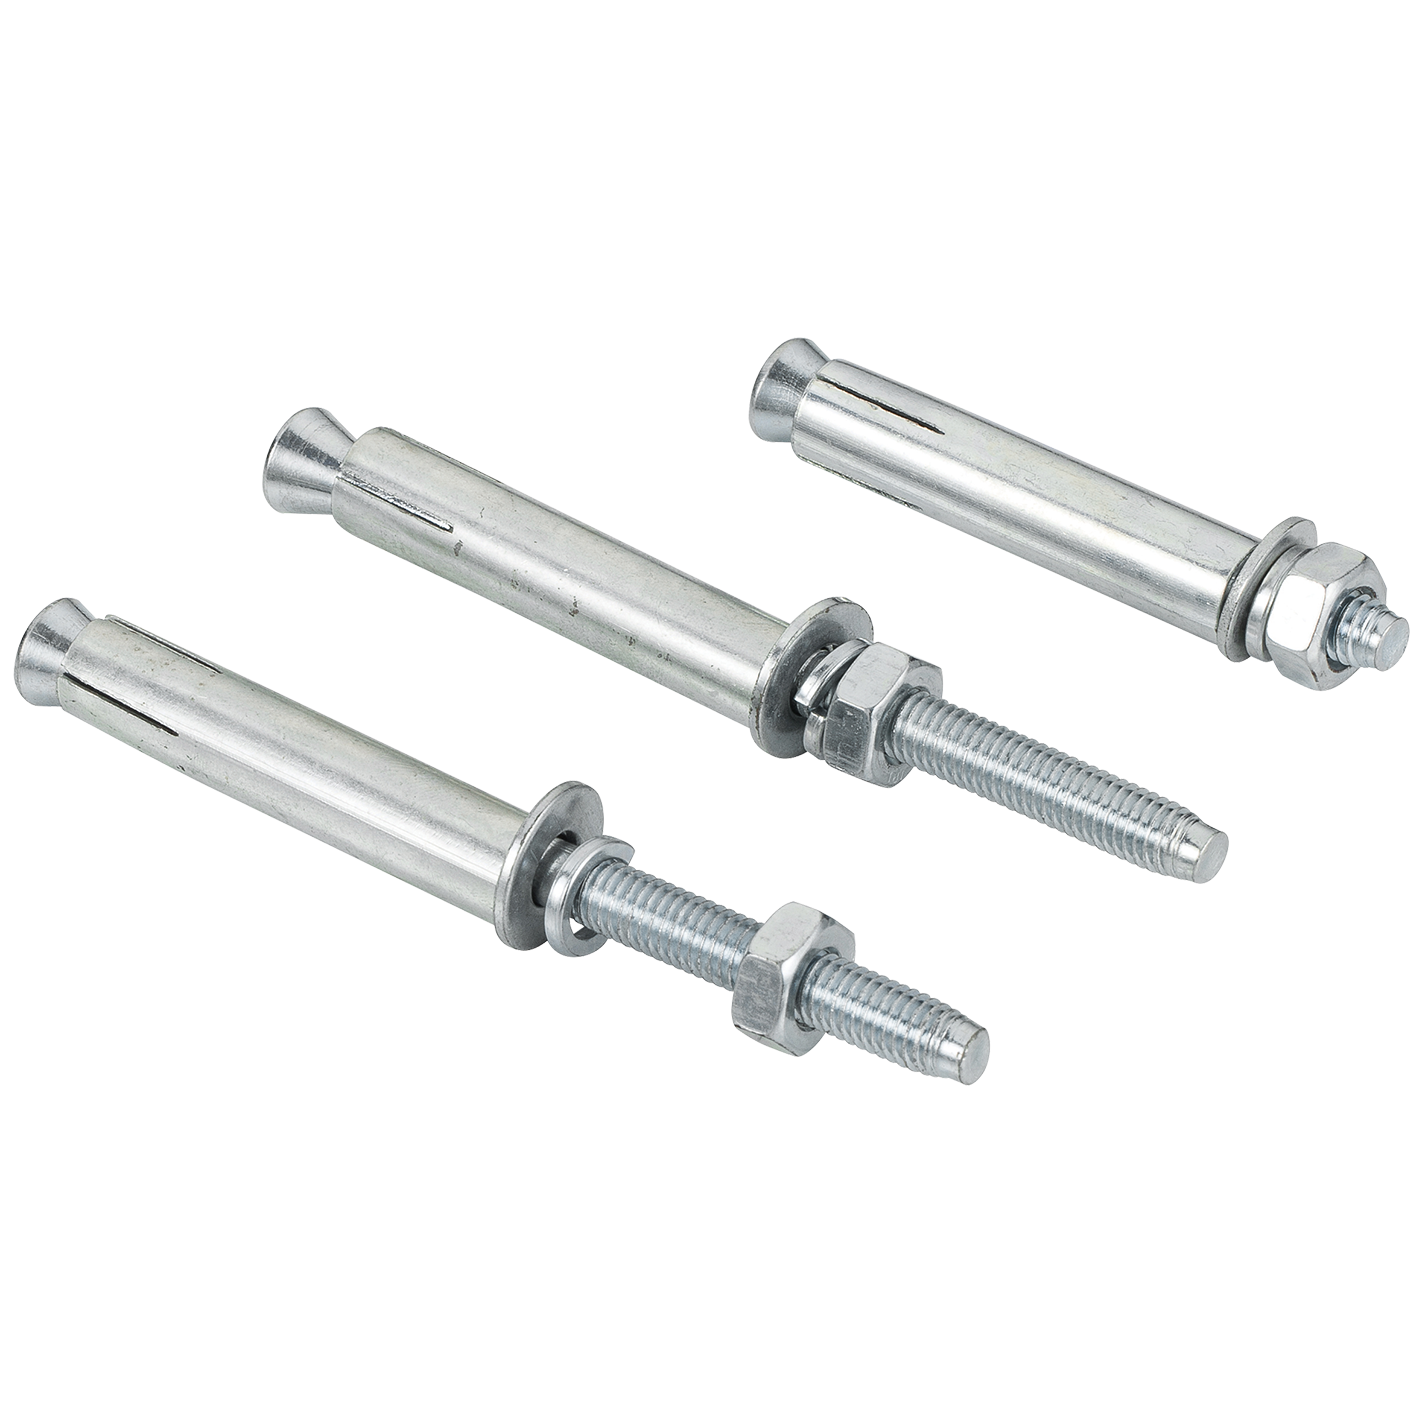 M8X8 AIRPIPE WALL EXPANSION BOLT